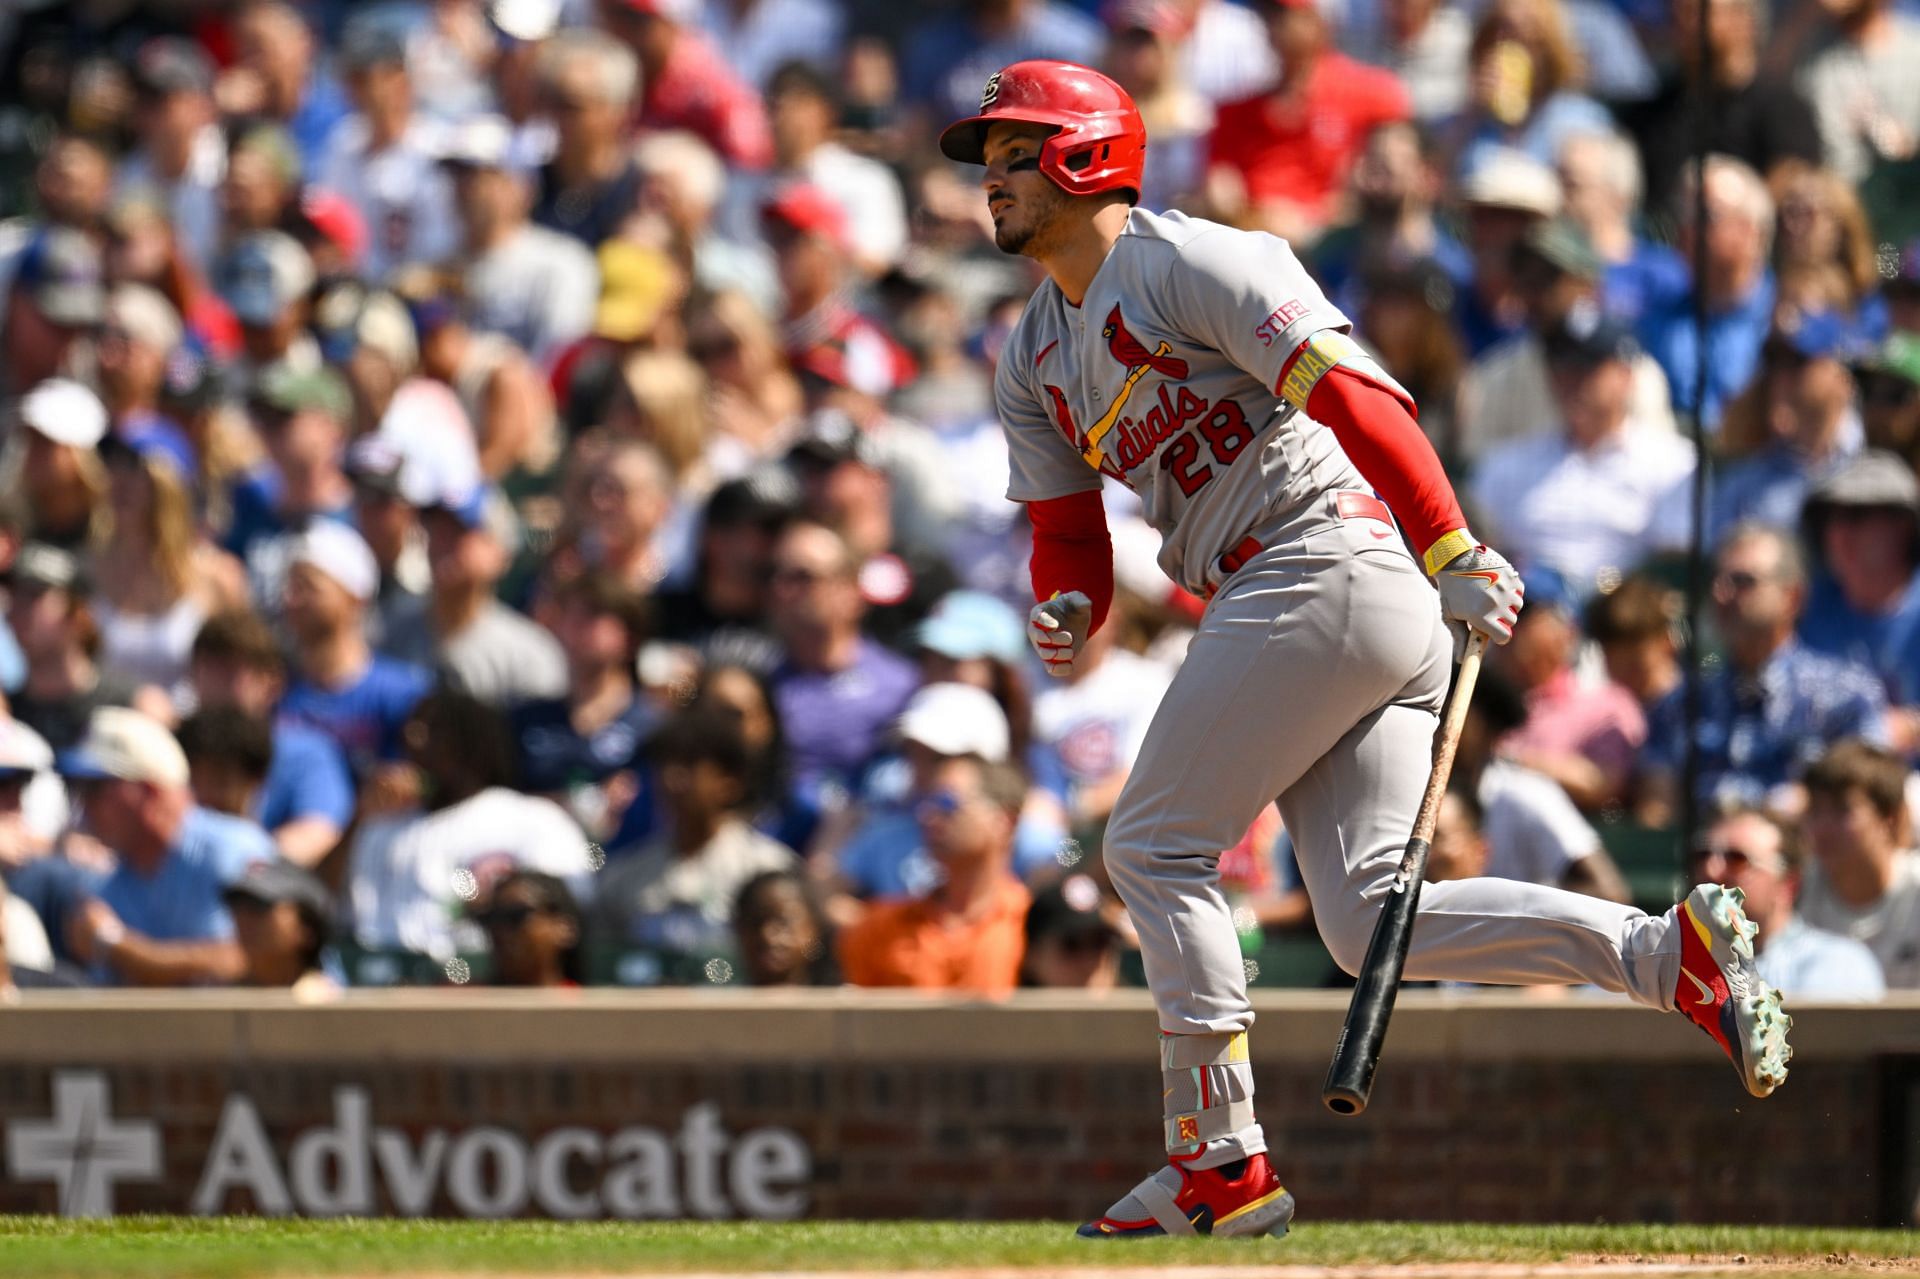 Nolan Arenado of the St. Louis Cardinals against the Chicago Cubs at Wrigley Field